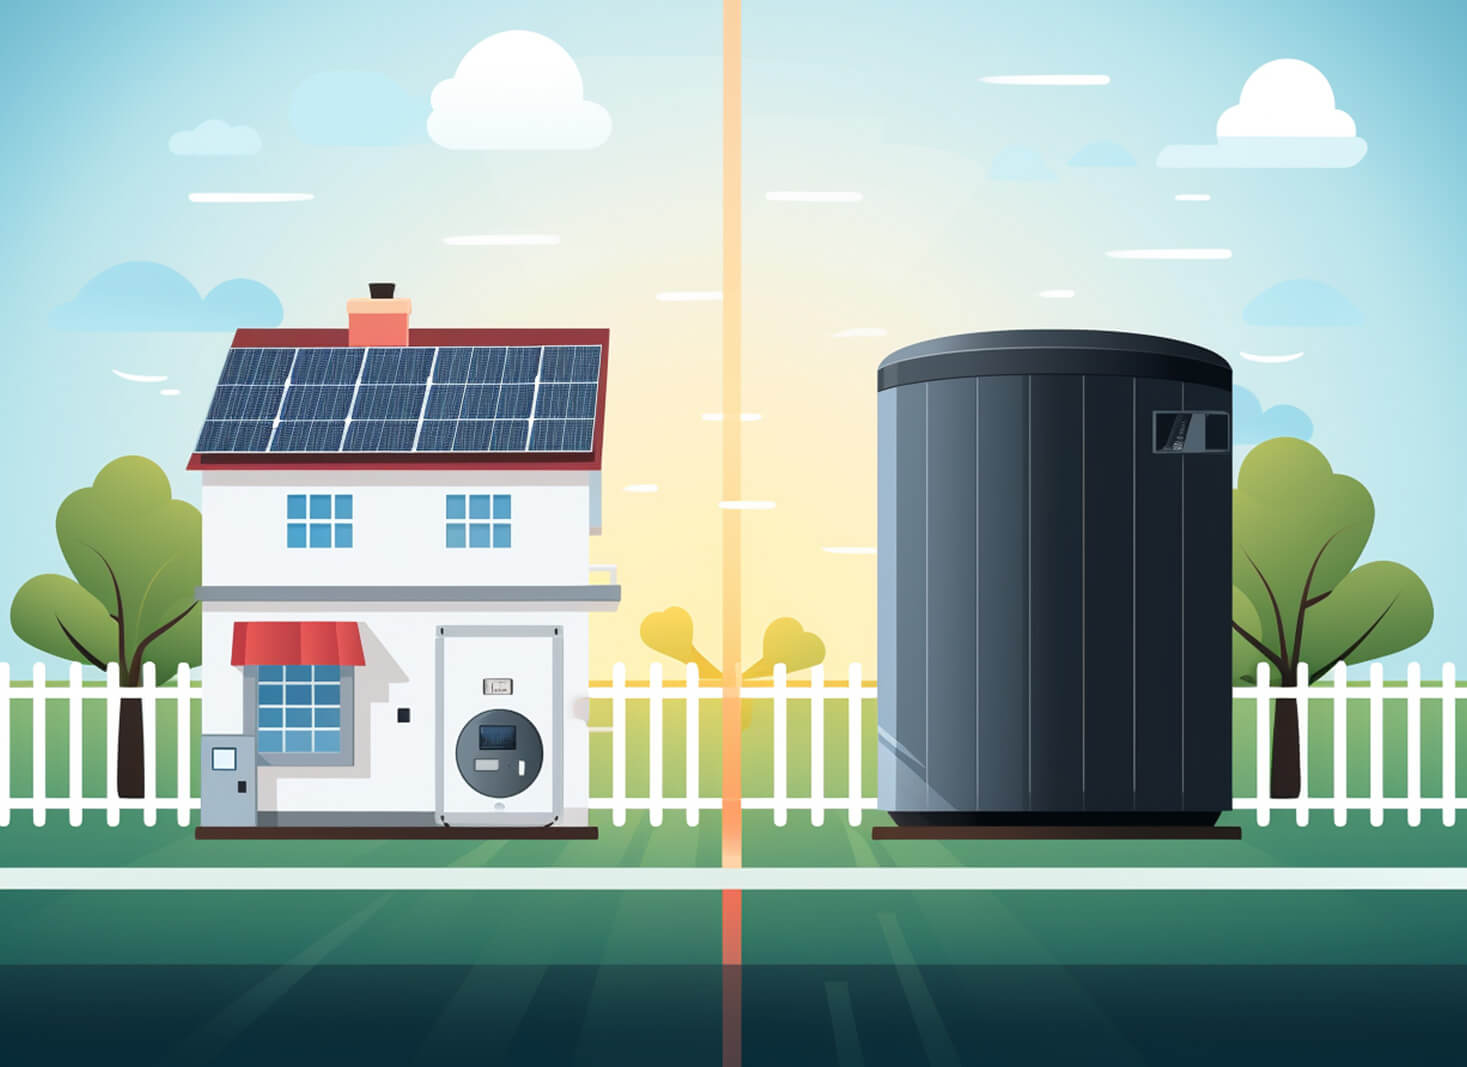 Comparing solar hot water systems and heat pumps